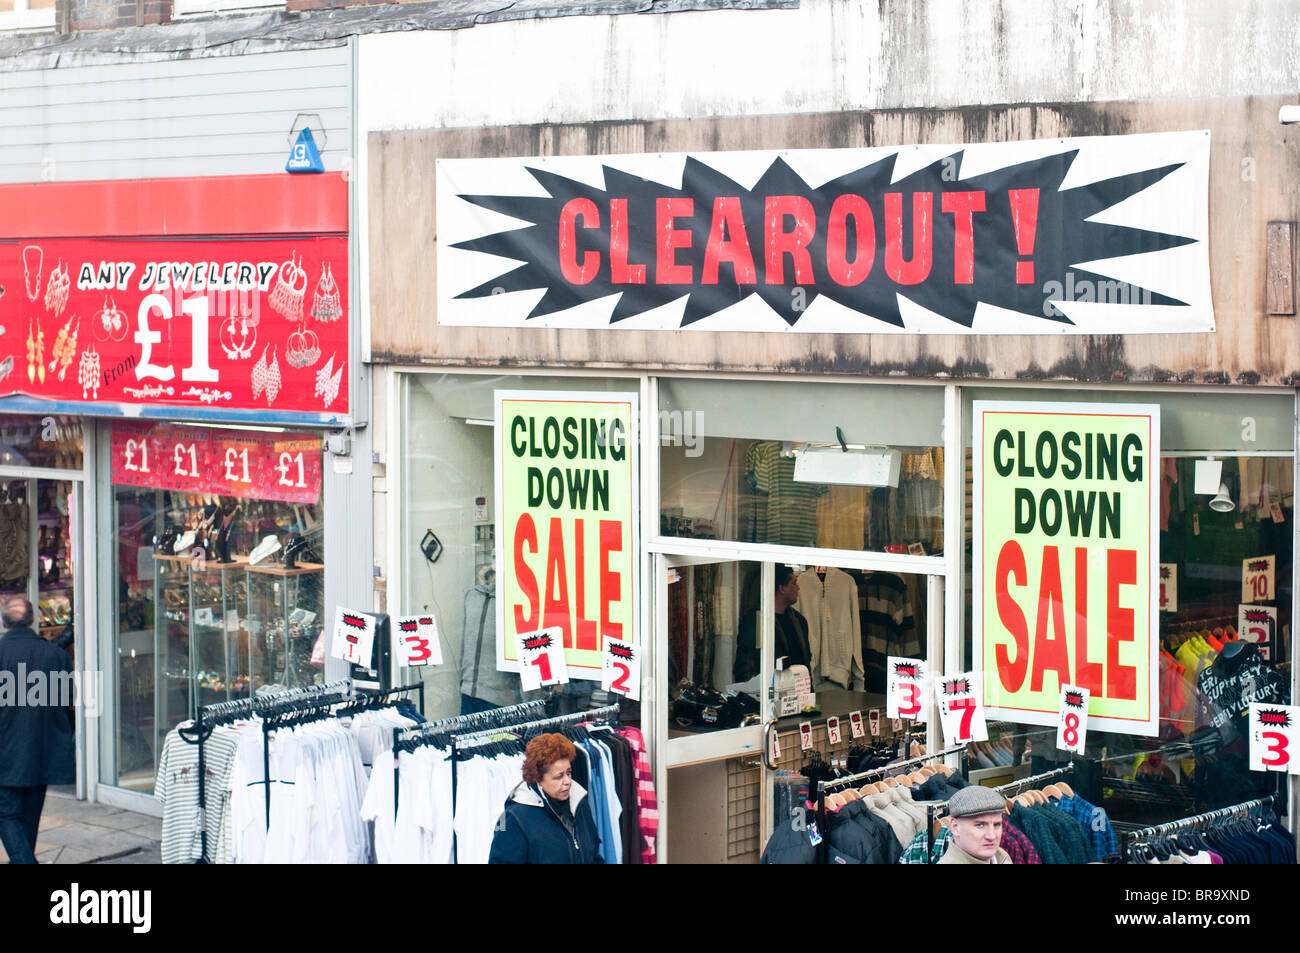 Clear out sign and closing down front of High street shop Stock Photo